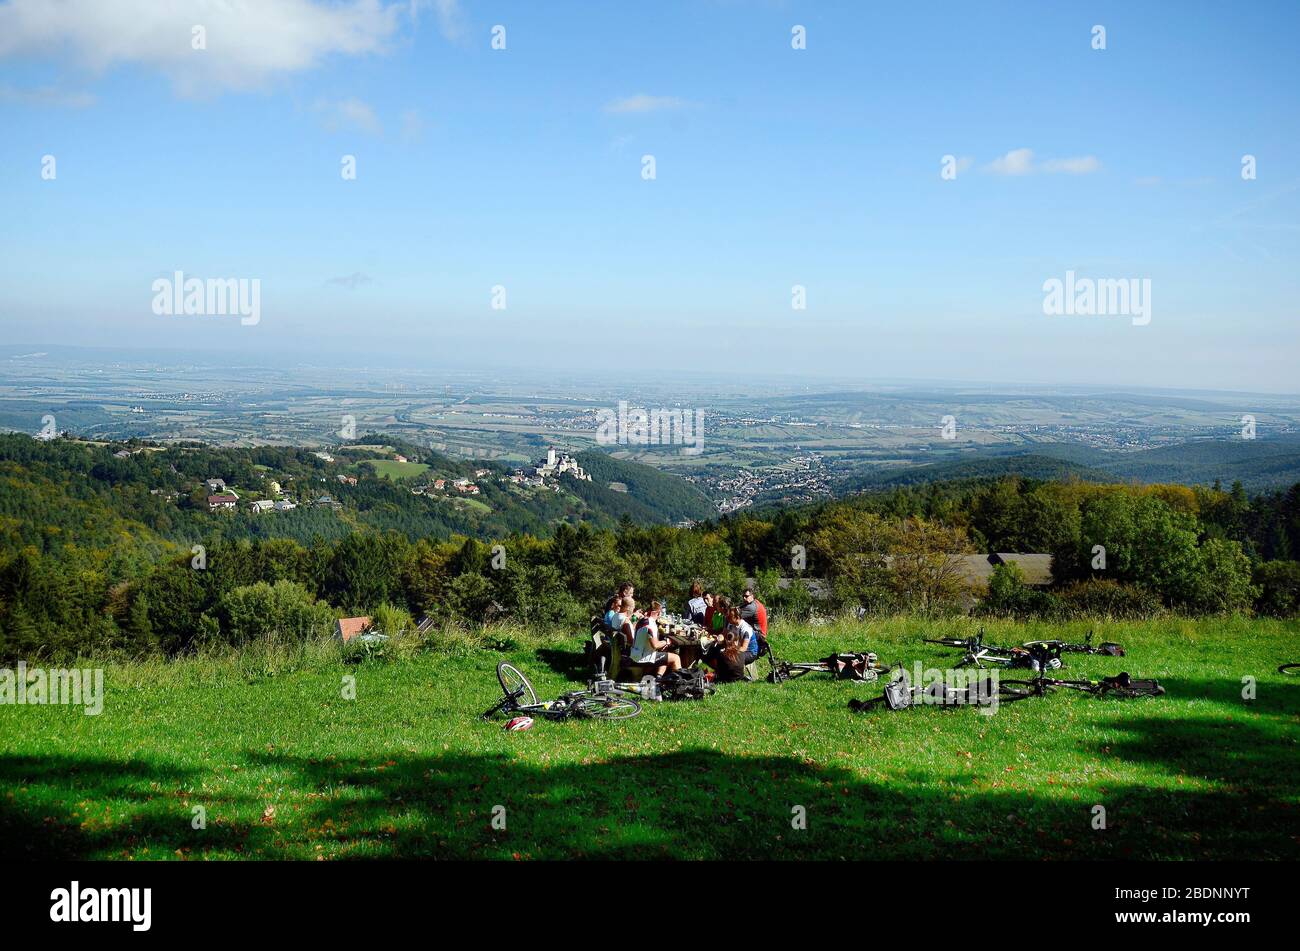 Forchtenstein, Austria - September 28, 2014: Group of unidentified cyclists rest in Rosalia mountains with view to village and castle Forchtenstein in Stock Photo